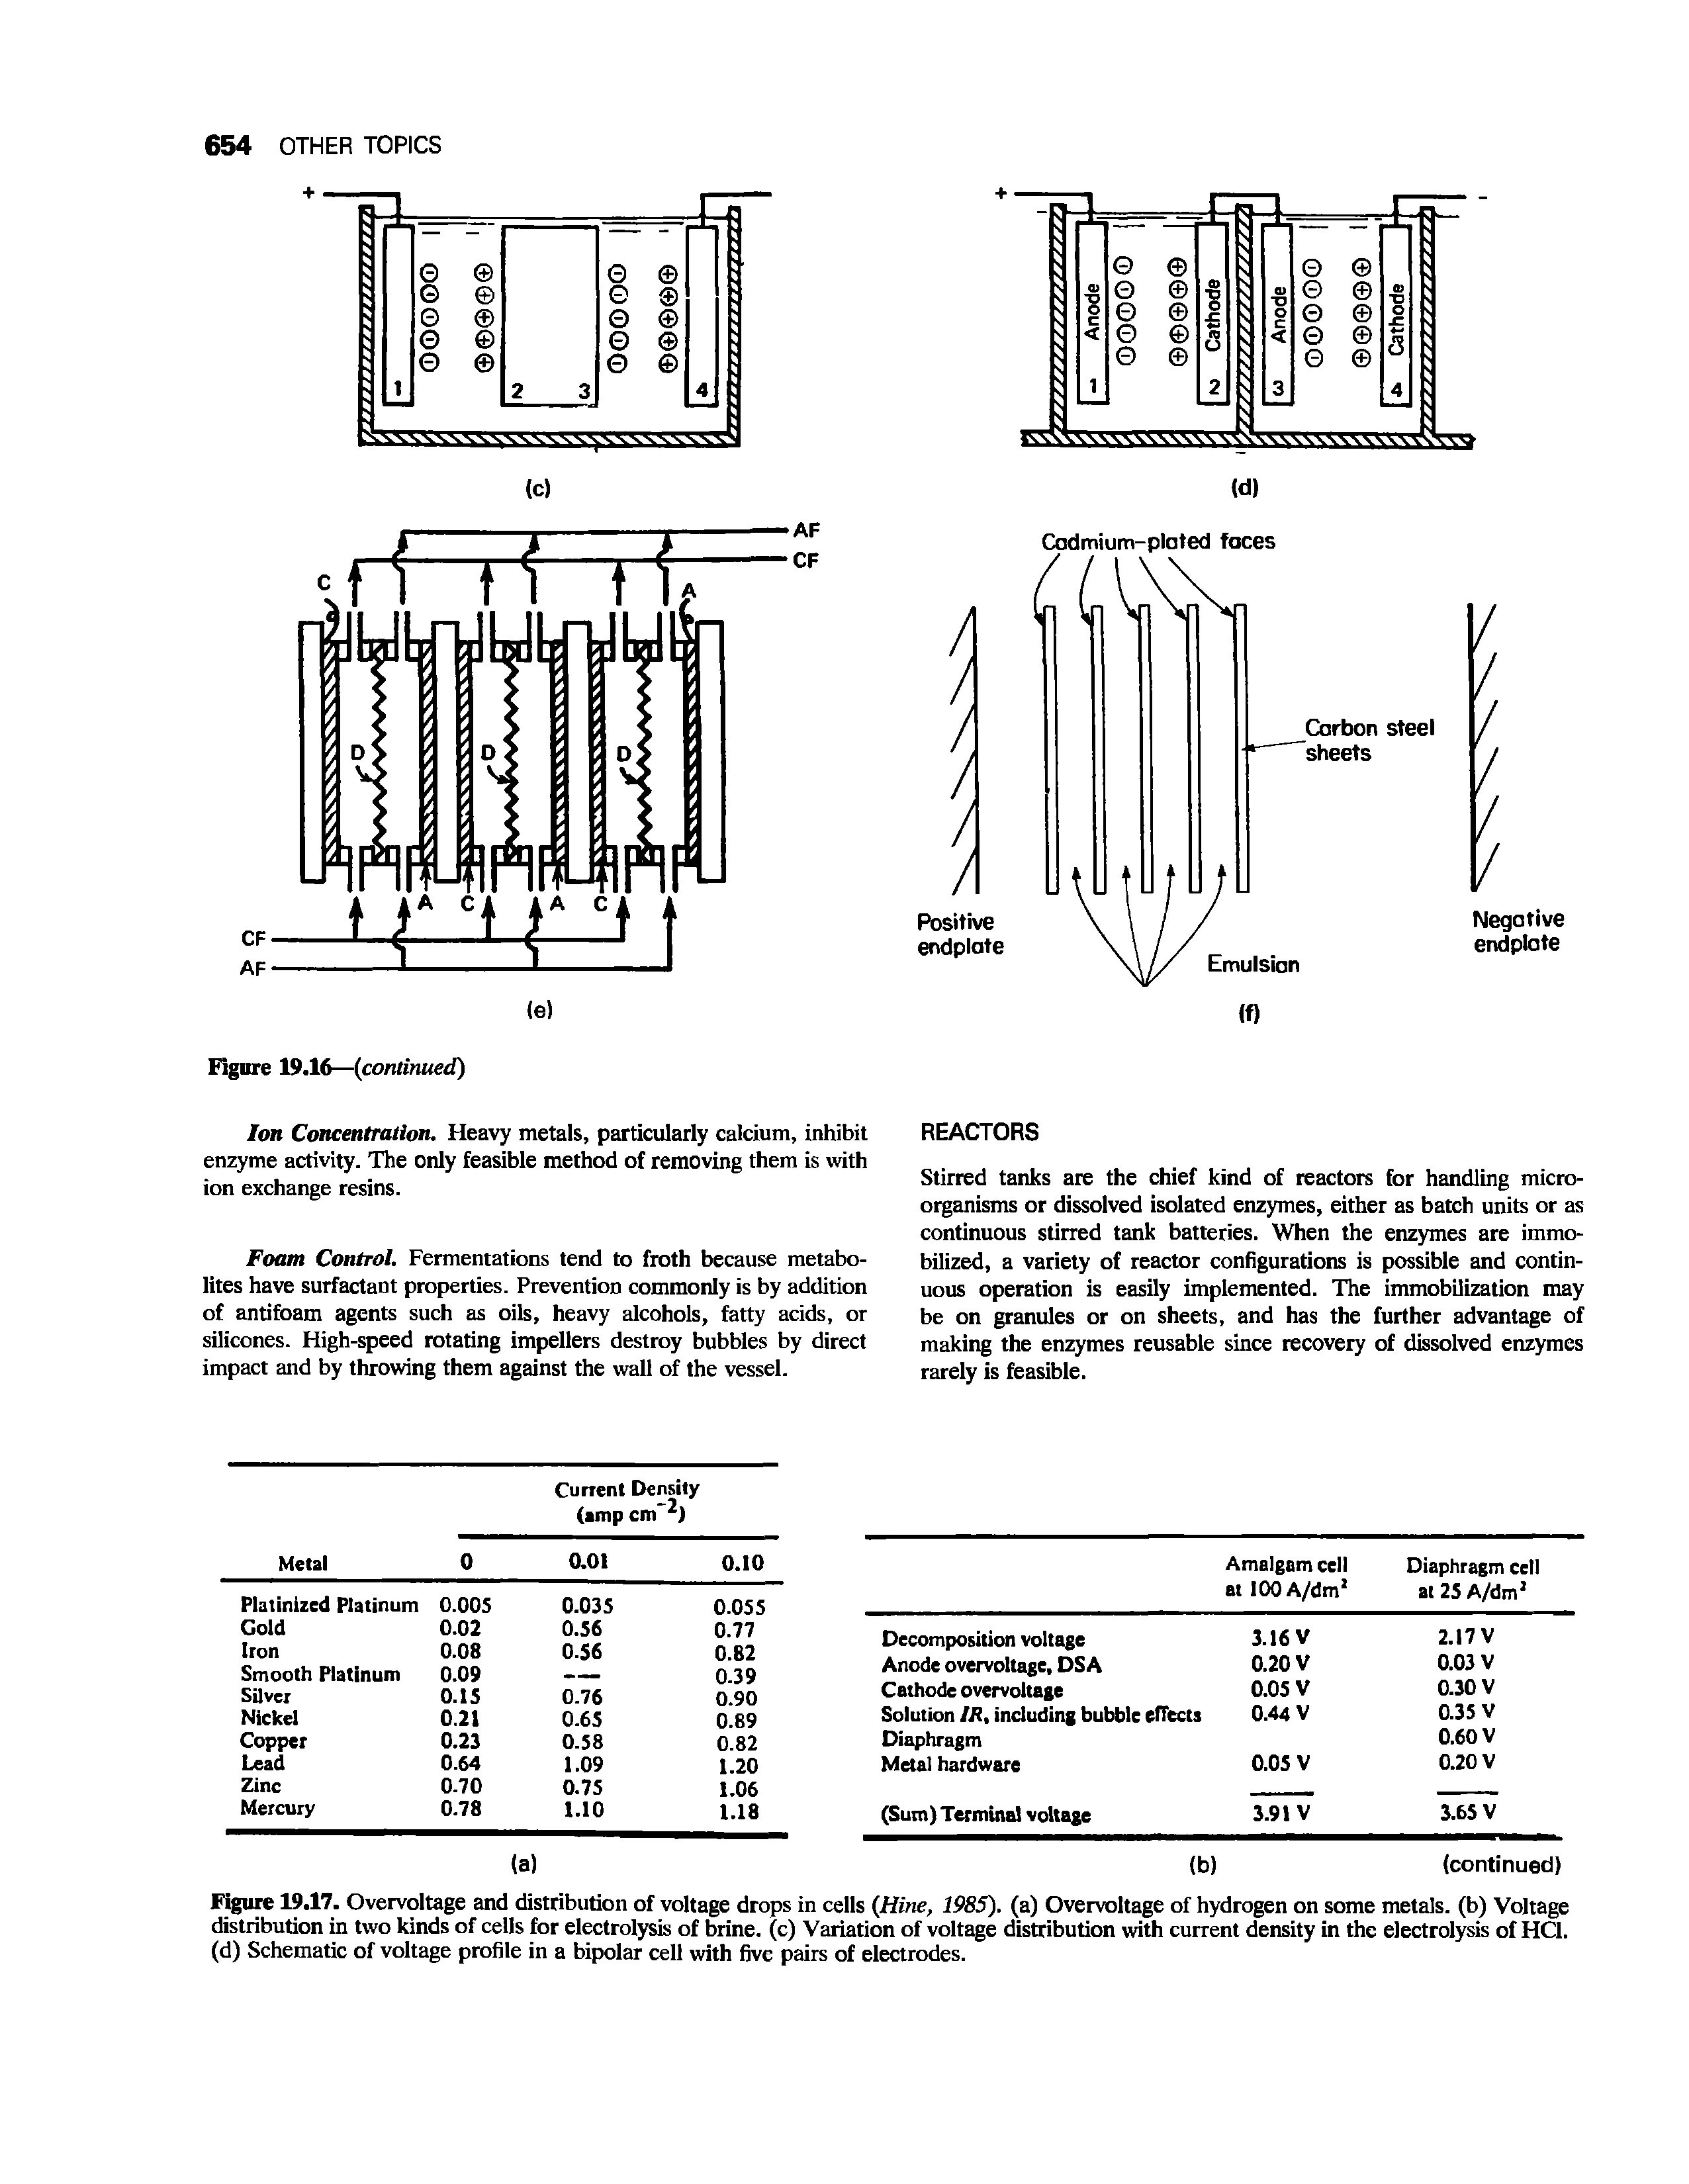 Figure 19.17. Overvoltage and distribution of voltage drops in cells (Jtiine, 1985). (a) Overvoltage of hydrogen on some metals, (b) Voltage distribution in two kinds of cells for electrolysis of brine, (c) Variation of voltage distribution with current density in the electrolysis of HC1. (d) Schematic of voltage profile in a bipolar cell with five pairs of electrodes.